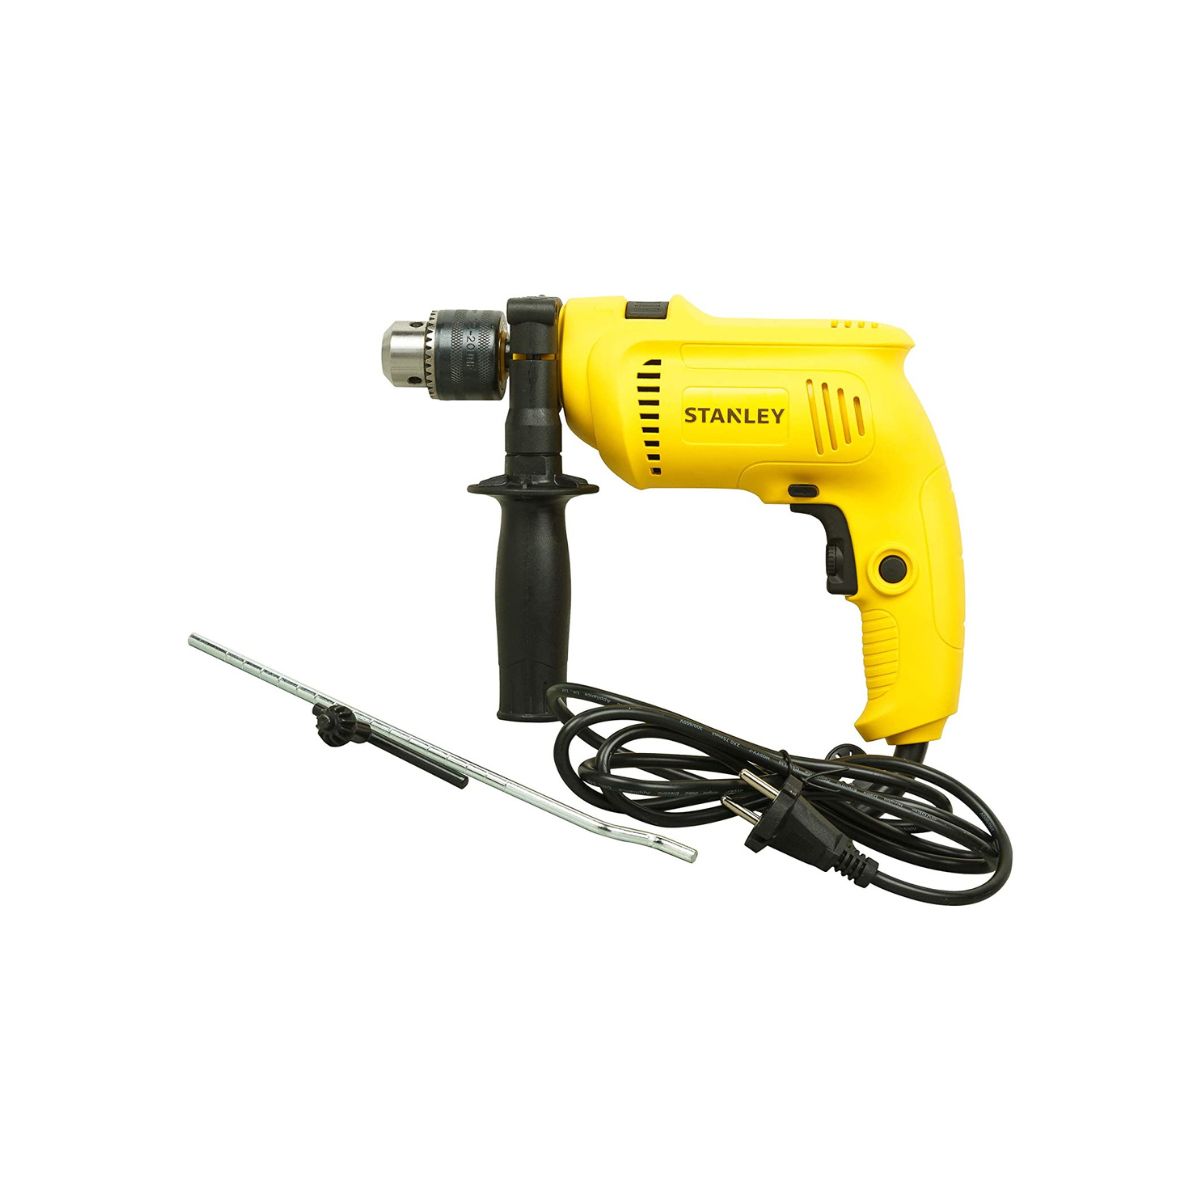 Stanley (SDH600-IN) 600W 13mm Percussion Drill